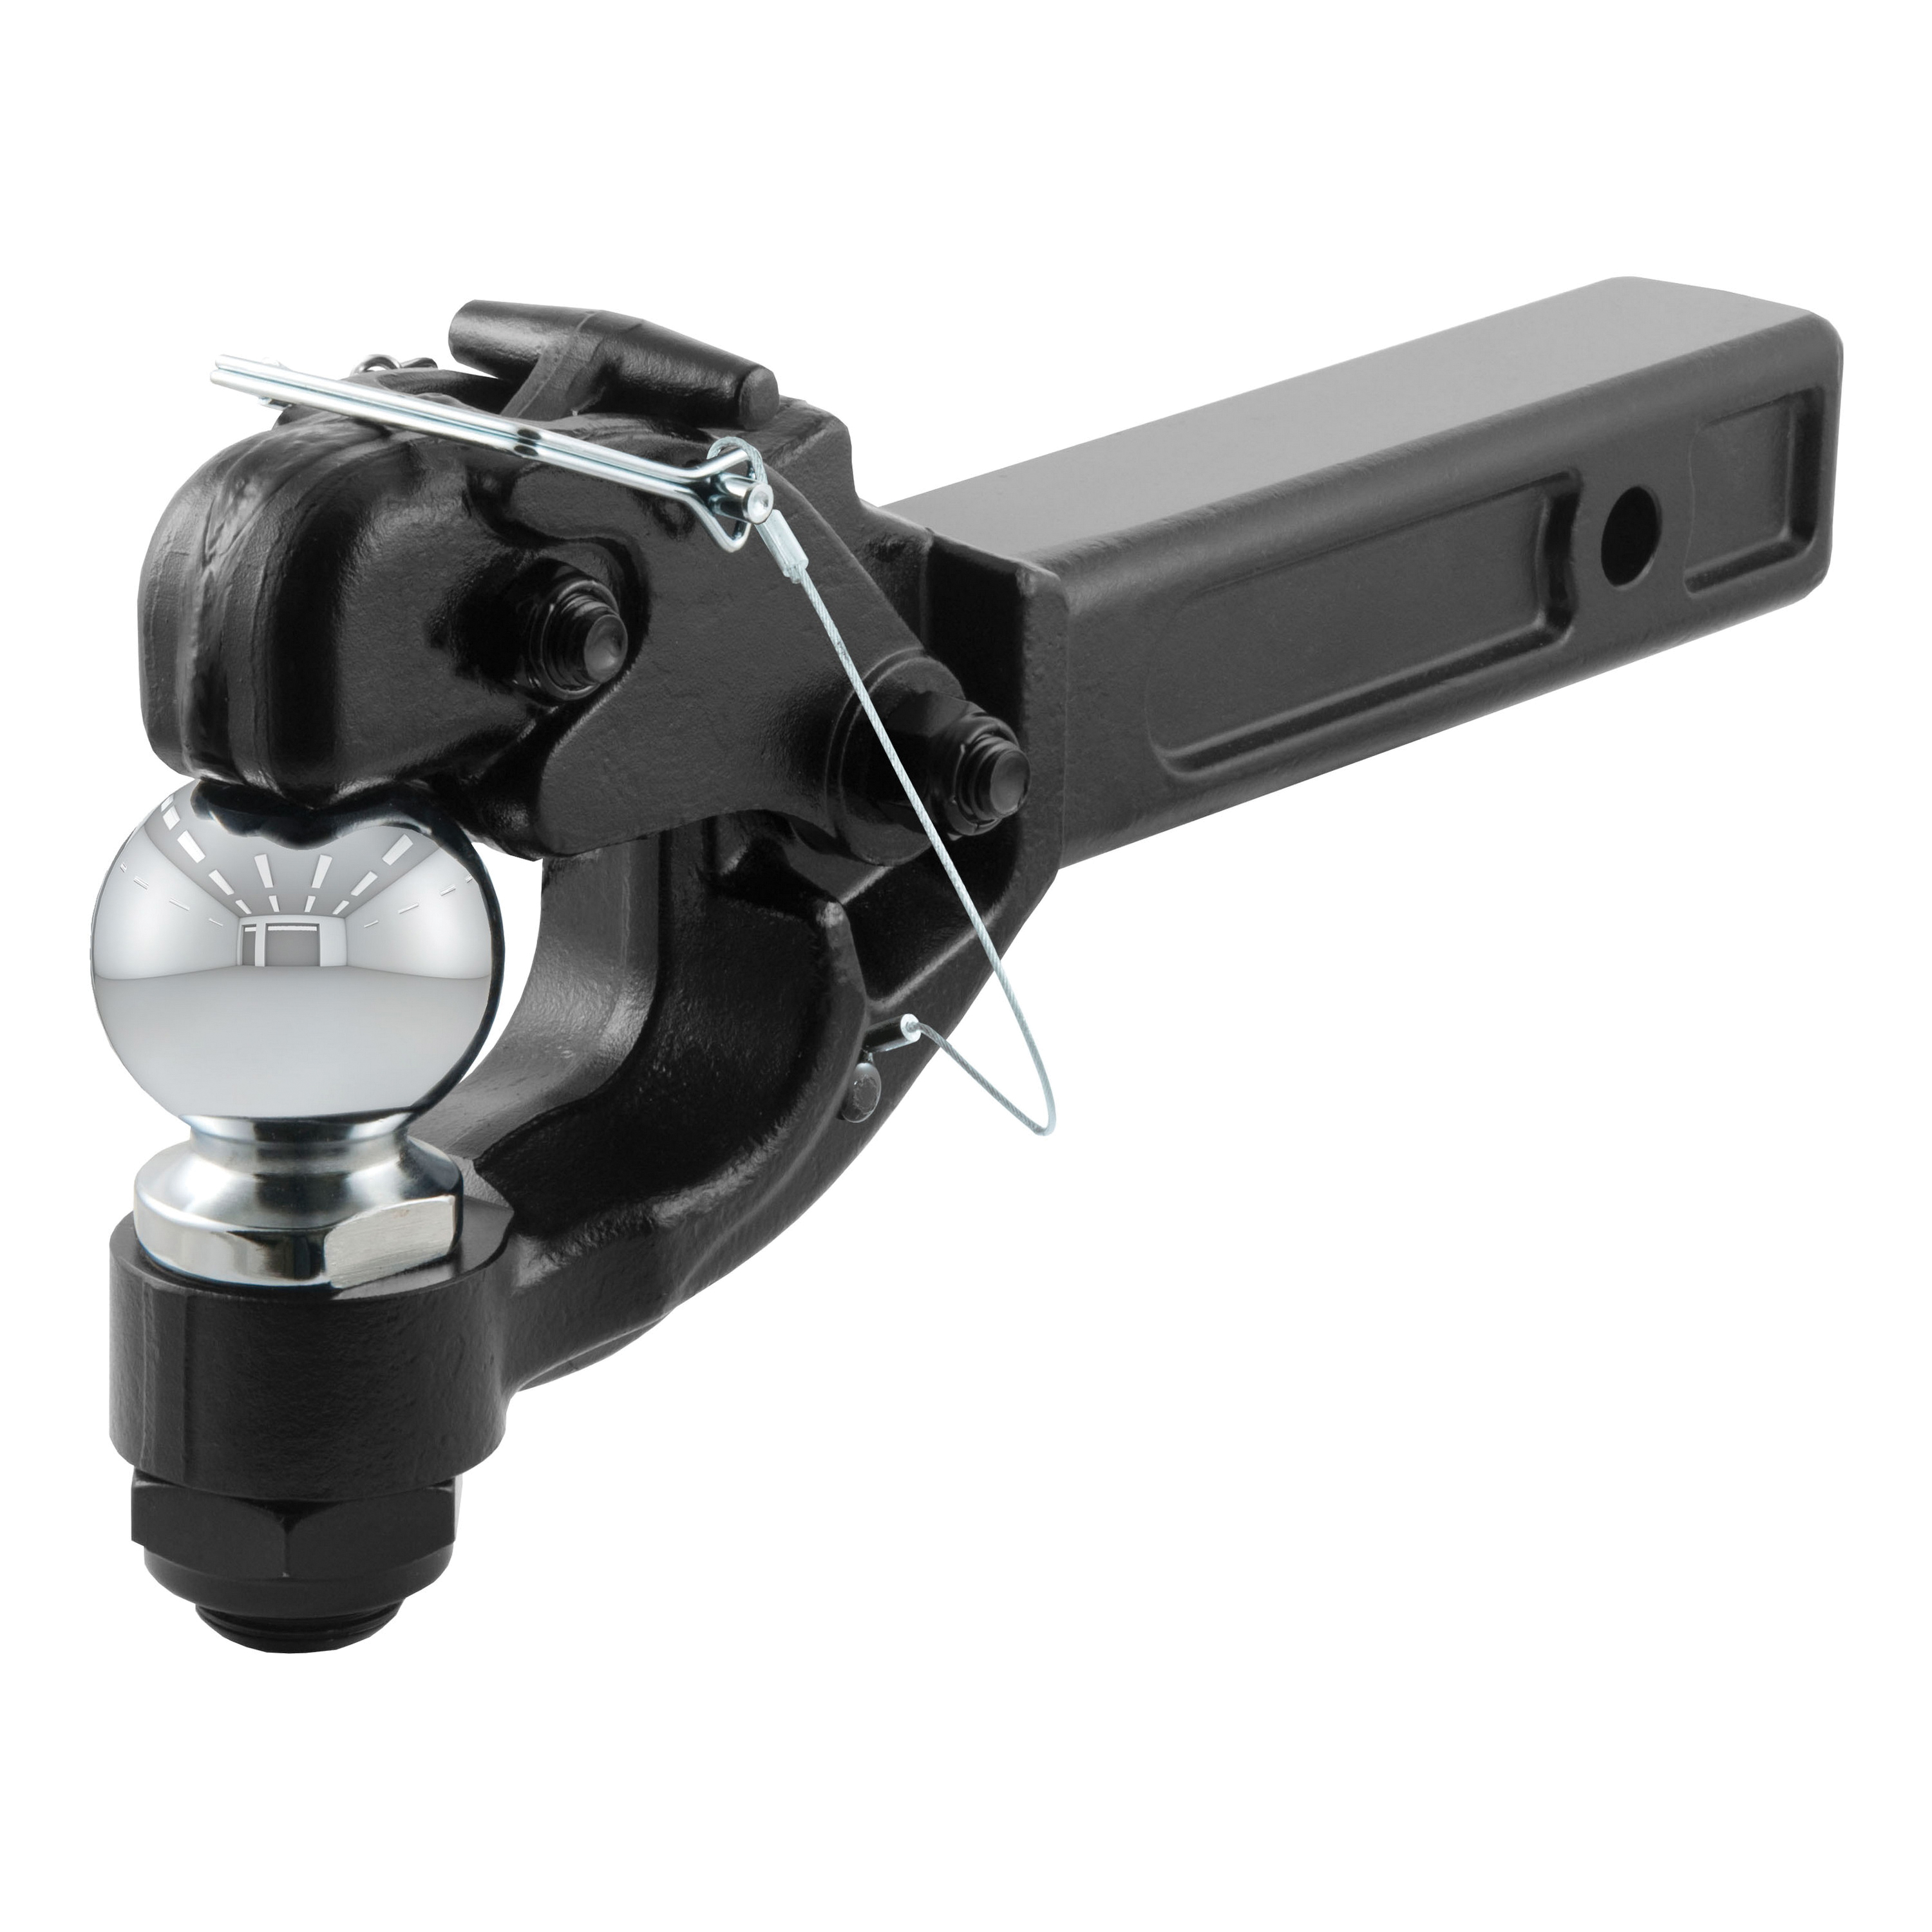 Curt 48006 Receiver-Mount Ball and Pintle Hitch, Steel, Black, Carbide Powder-Coated - 1